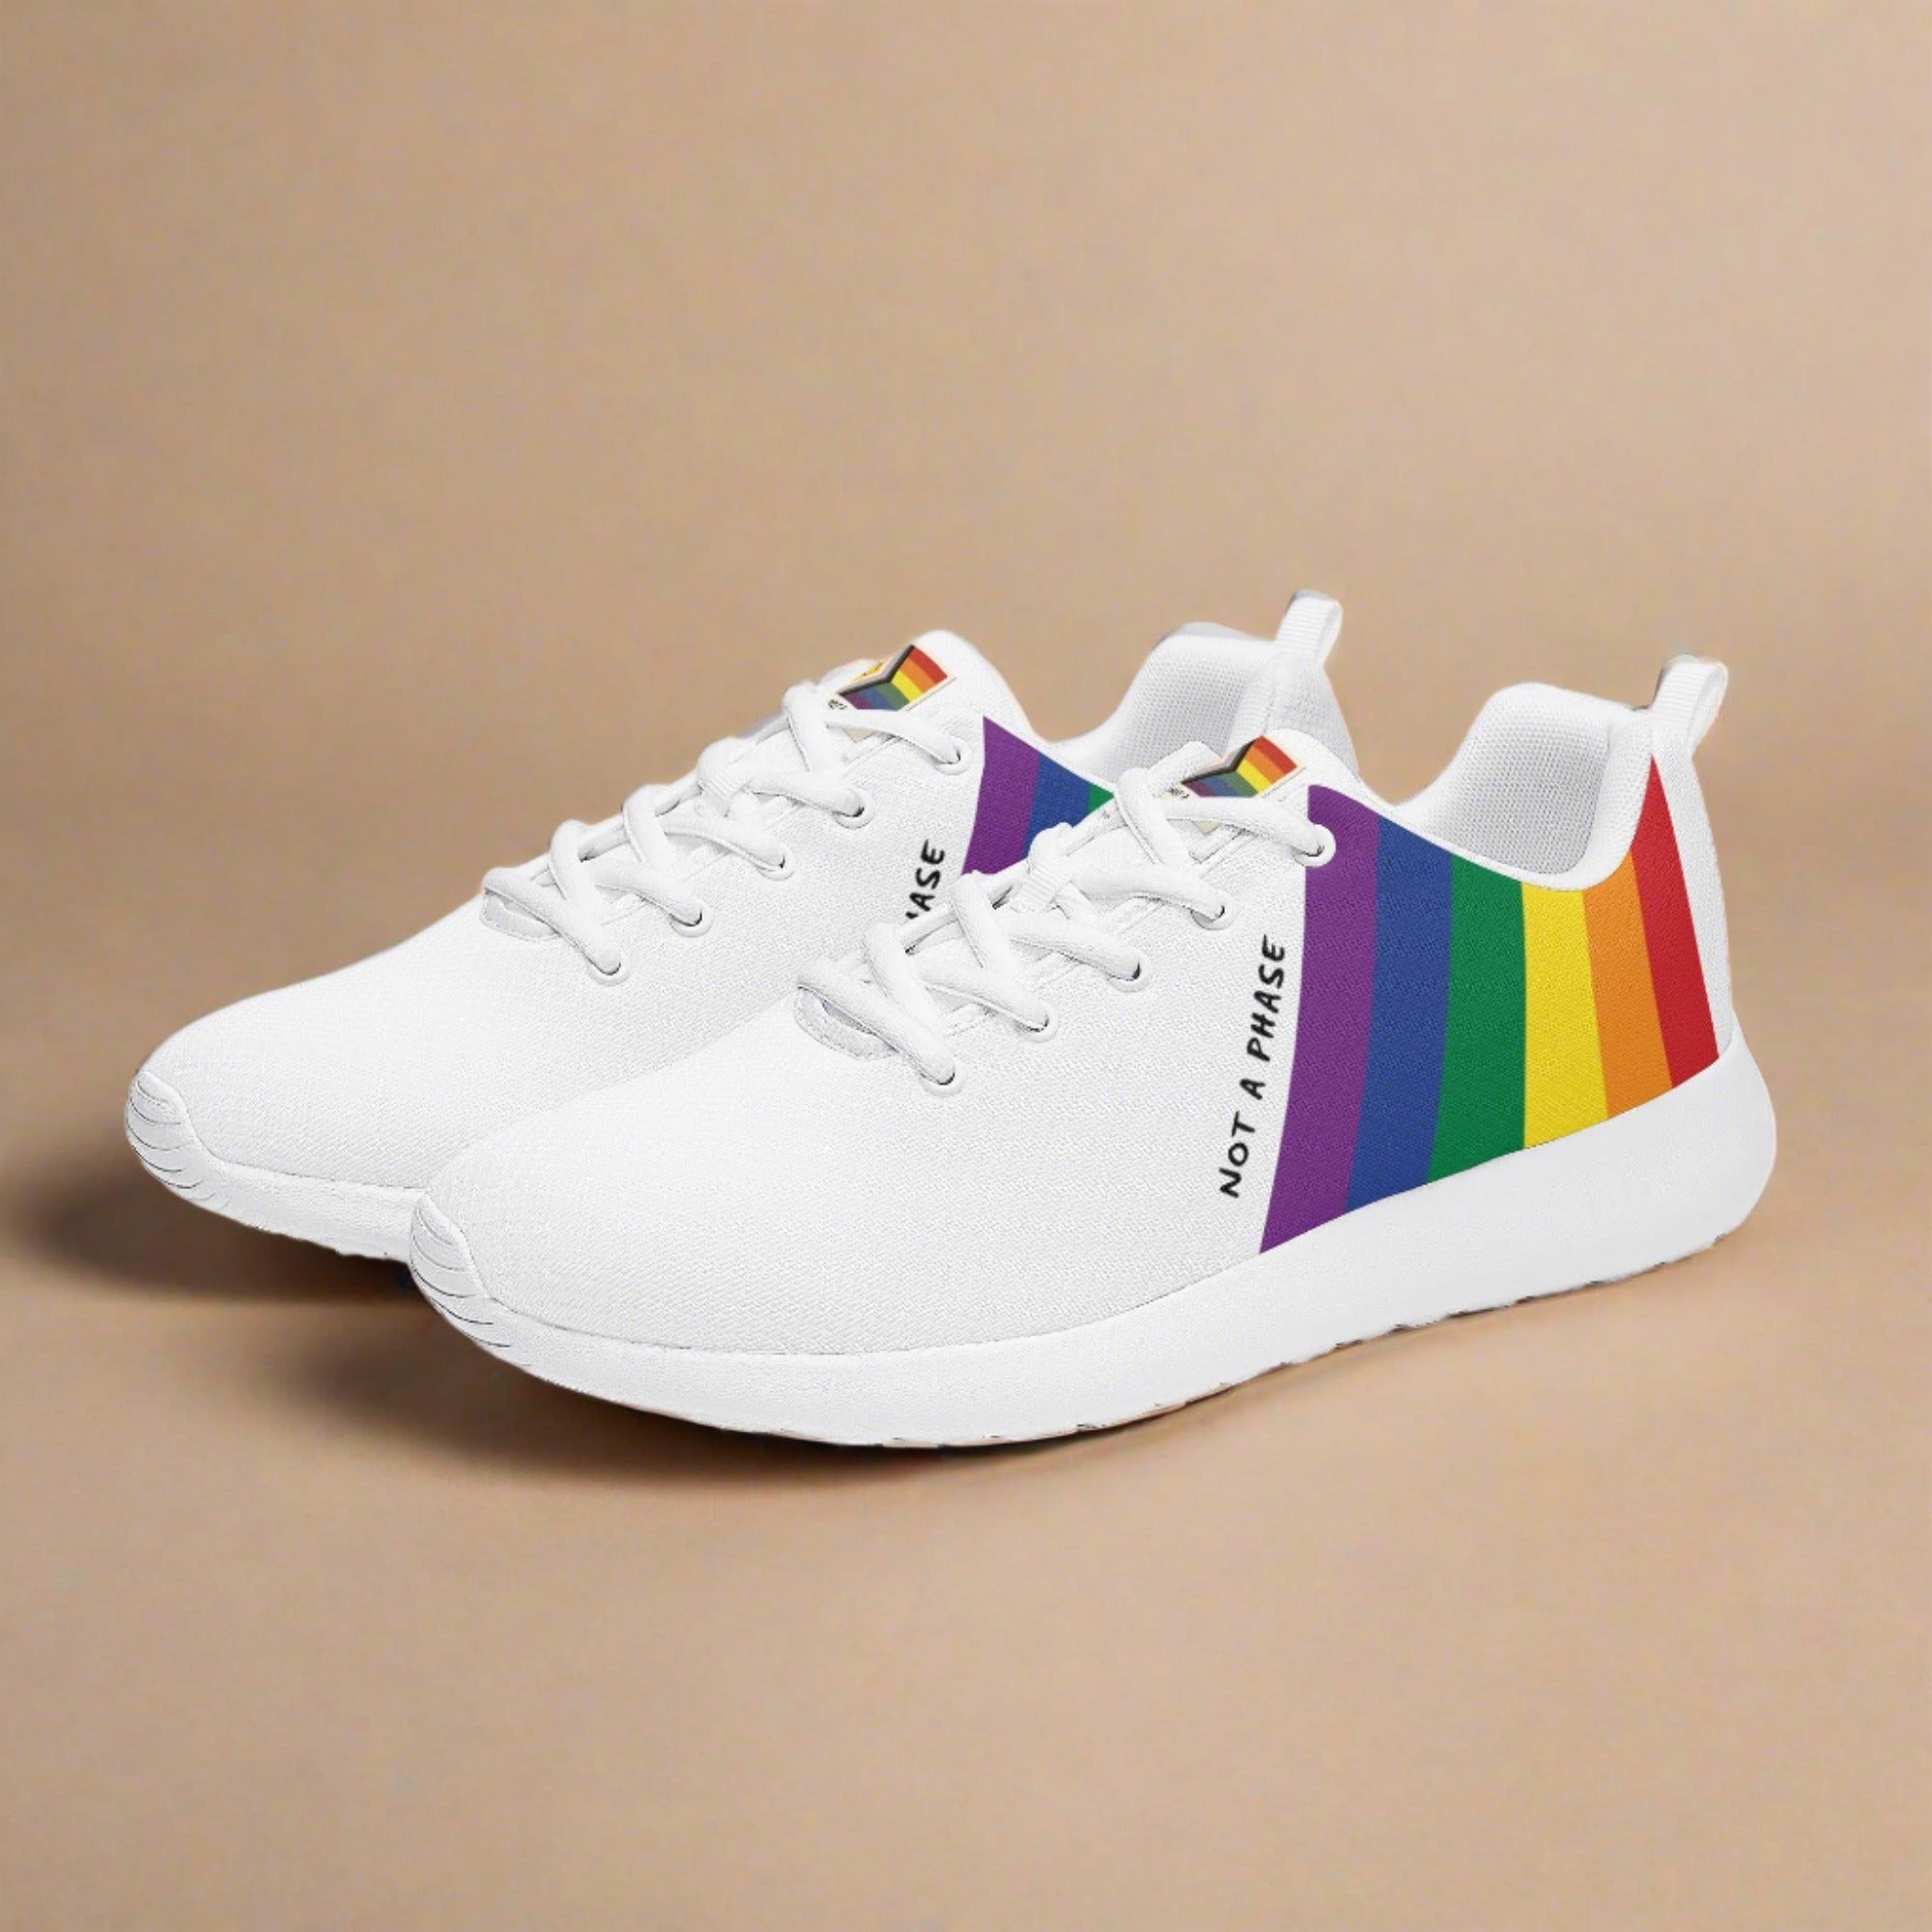 Rainbow Pride Not A Phase Women's Running Sneakers